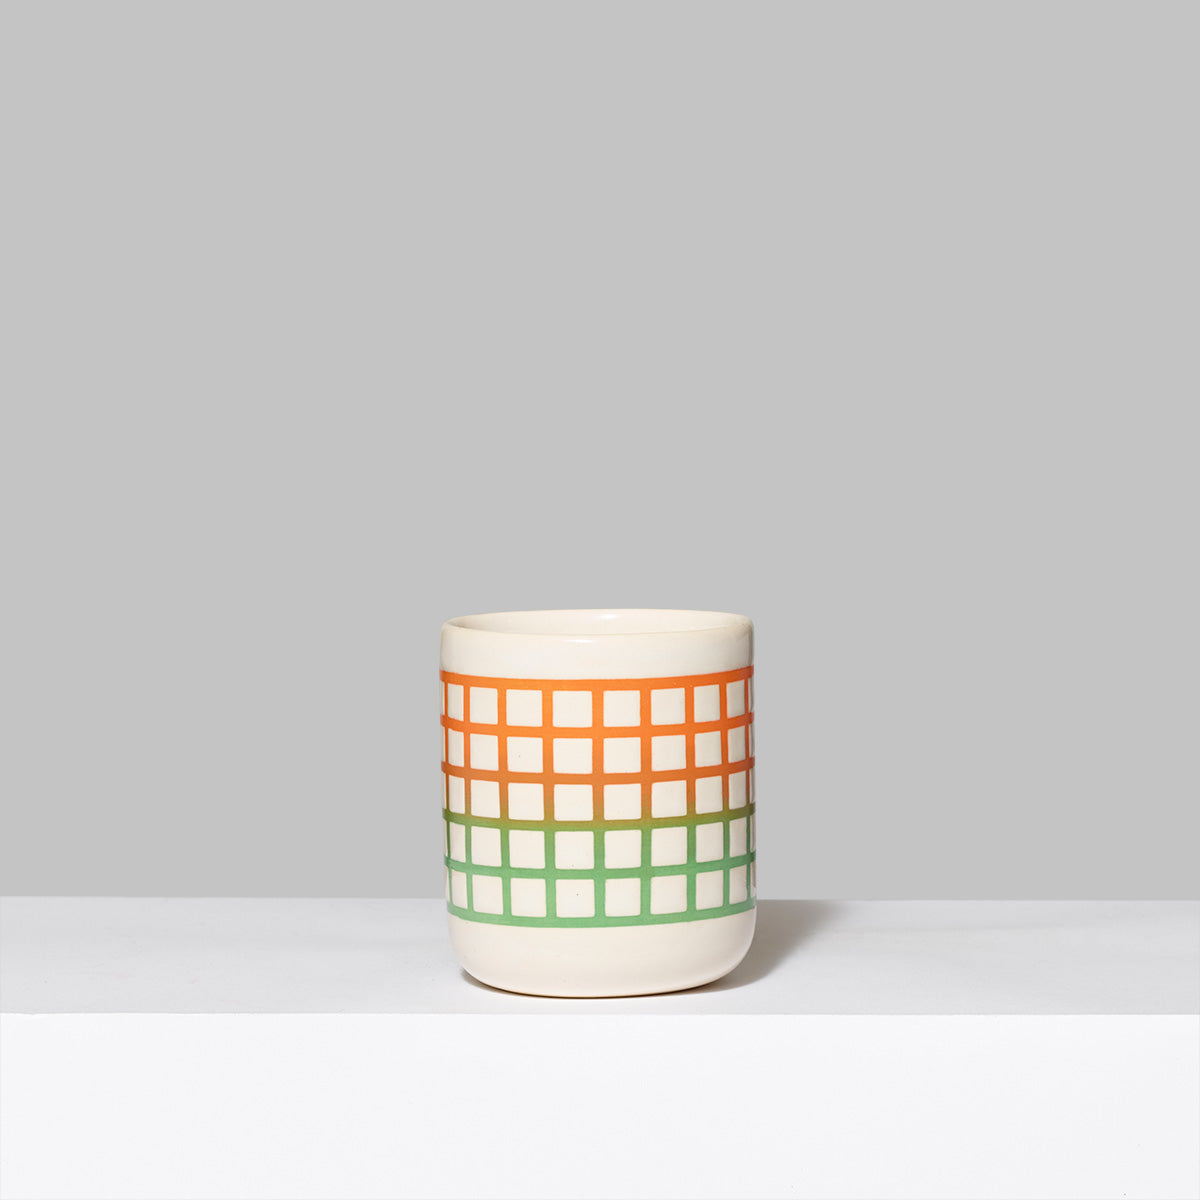 Handmade stoneware and glaze Biennial tumbler in green and orange. Measures 3" L x 3" W x 3.5" H